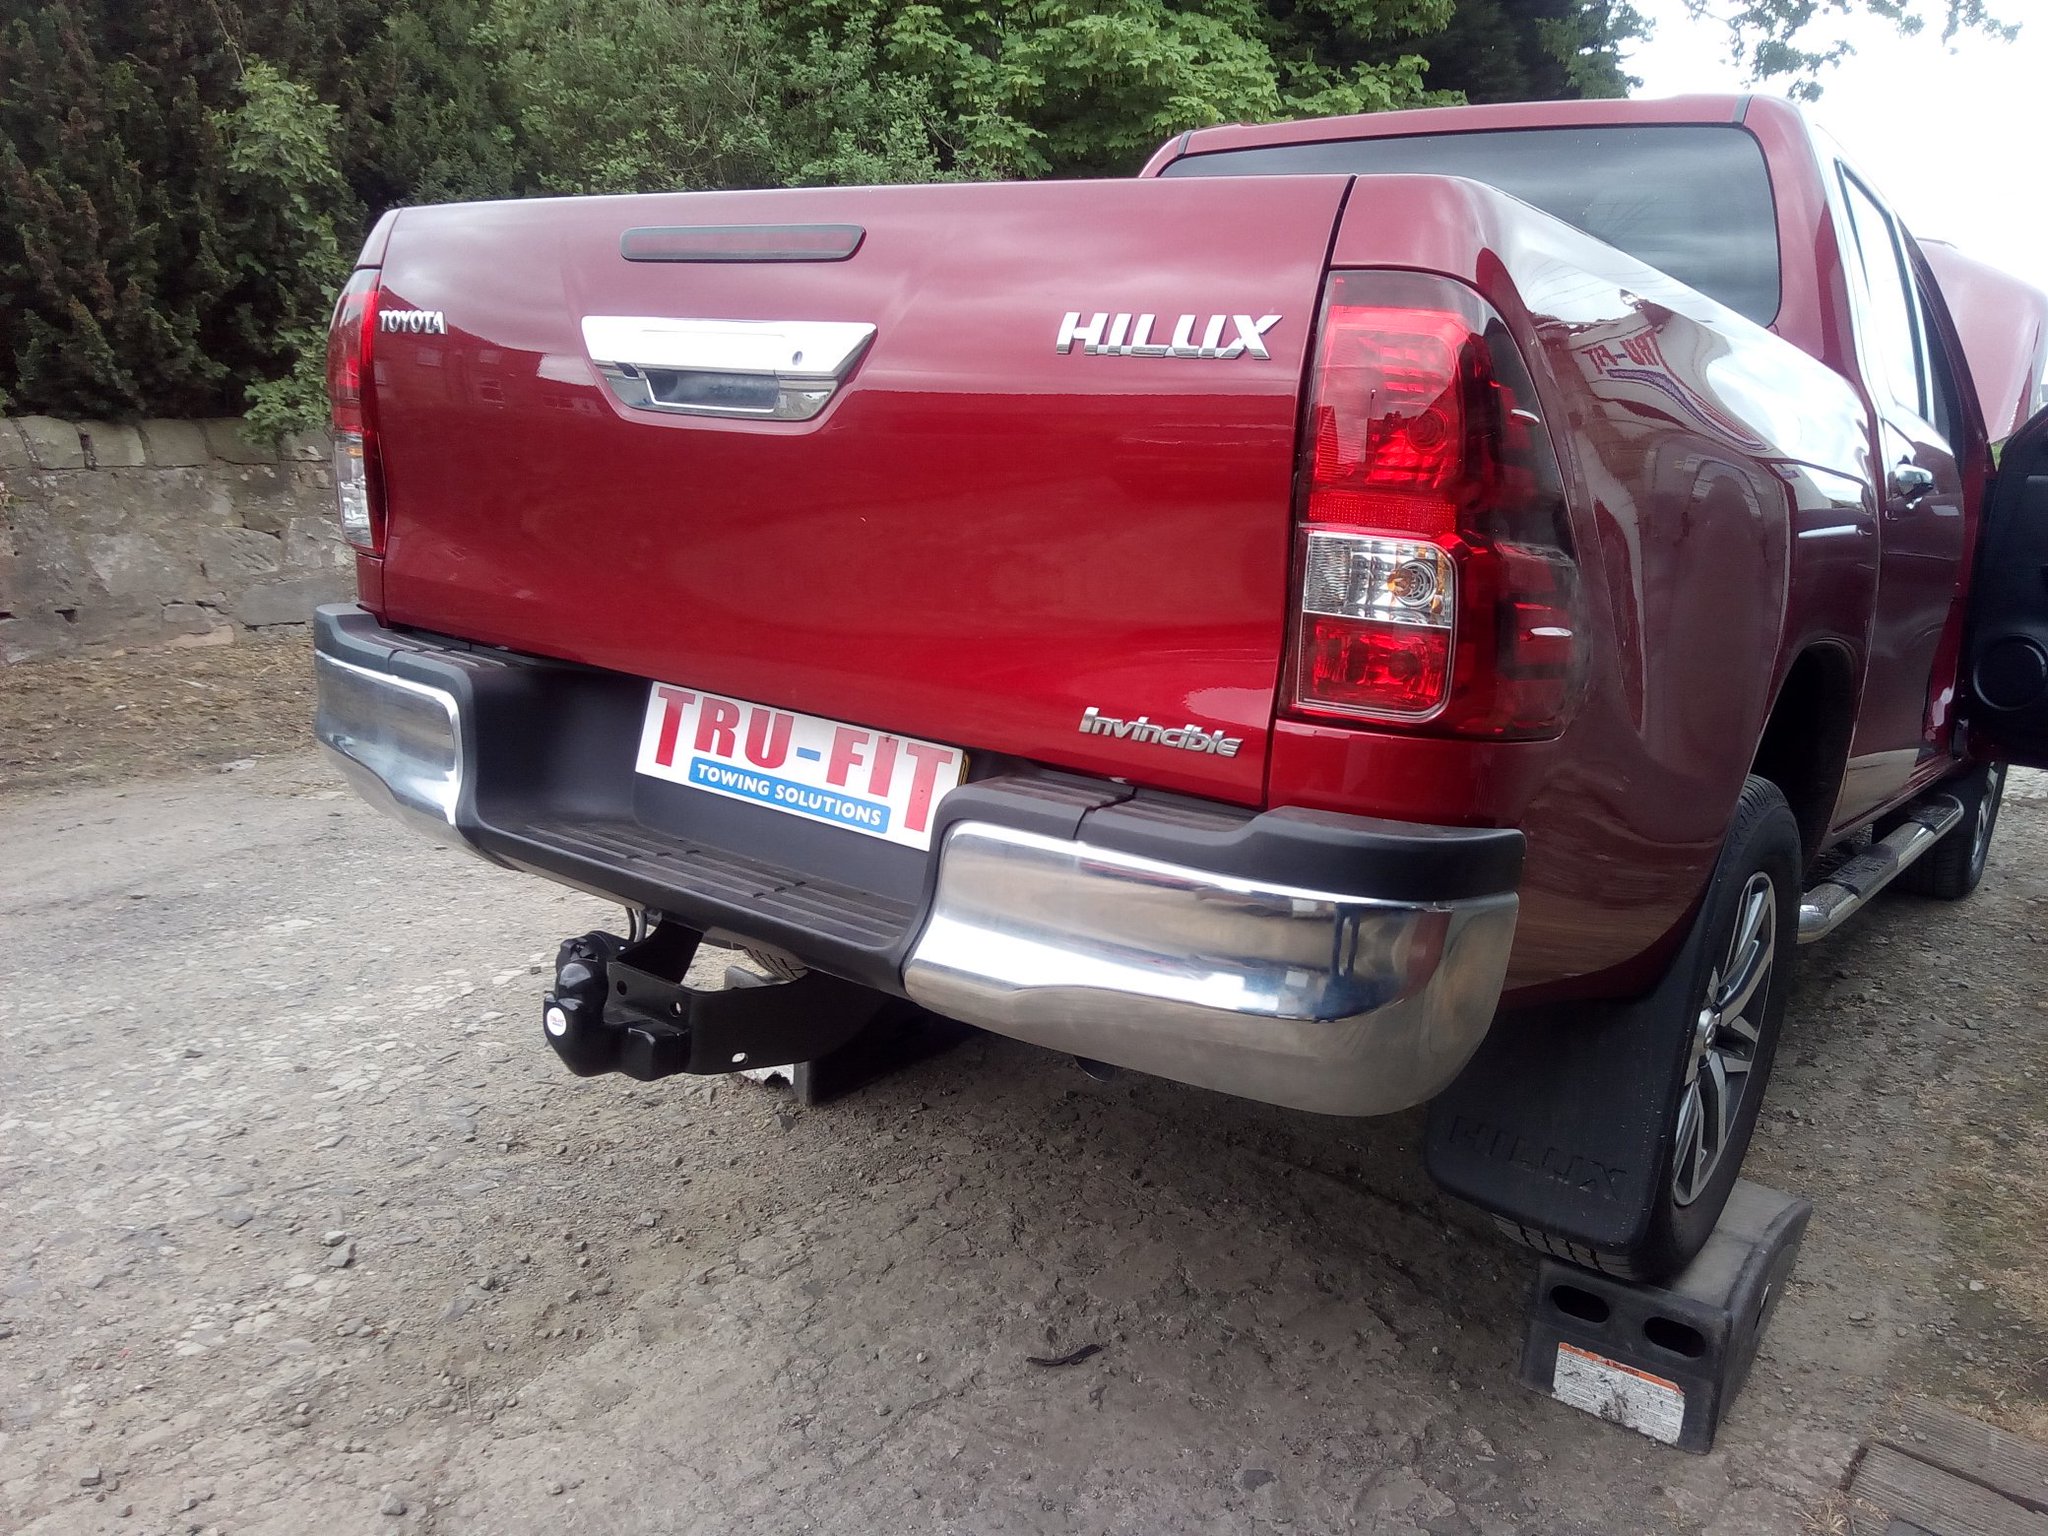 Harry on X: Toyota Hilux fitted with @PCTAutomotive towbar https